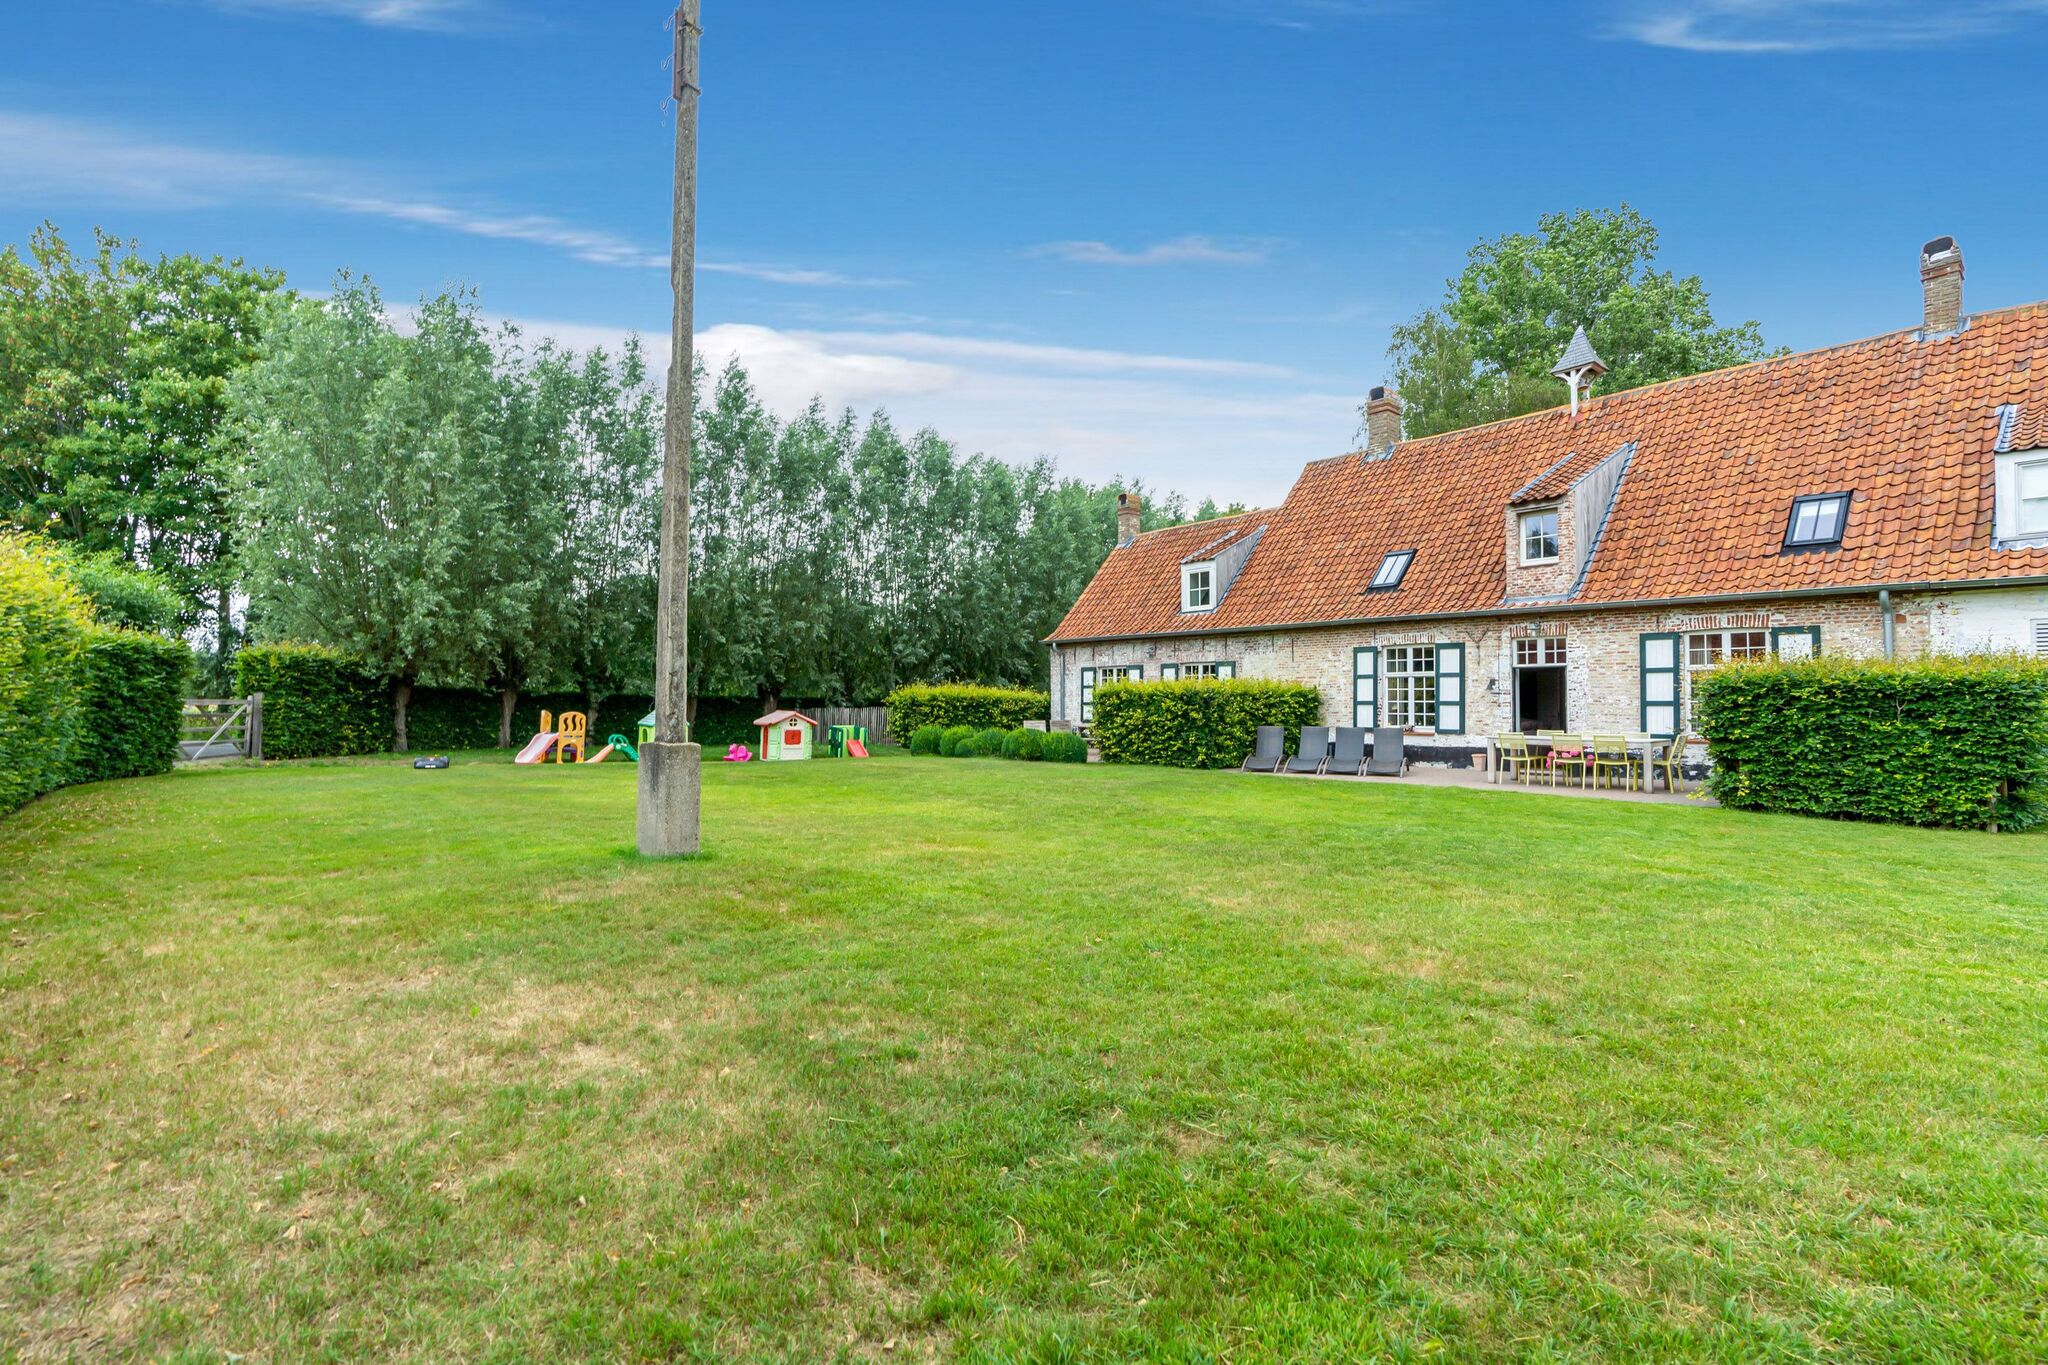 Manor House is part of an authentic farm complex in the middle of the polder landscape near Damme.